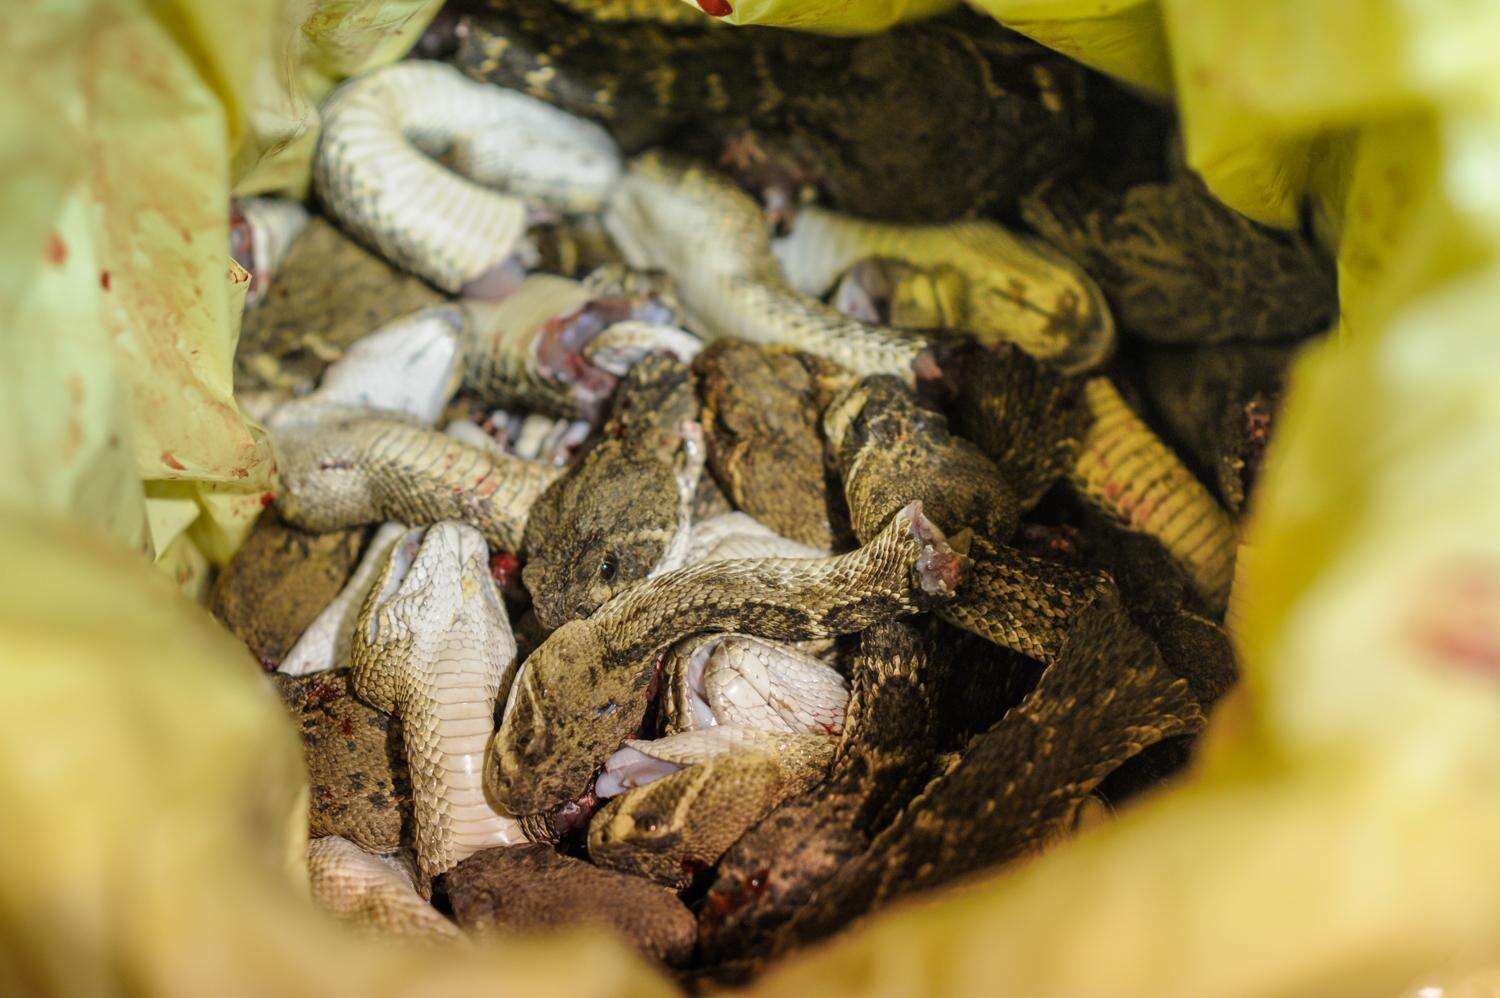 Decapitated rattlesnake heads at the Sweetwater snake roundup festival